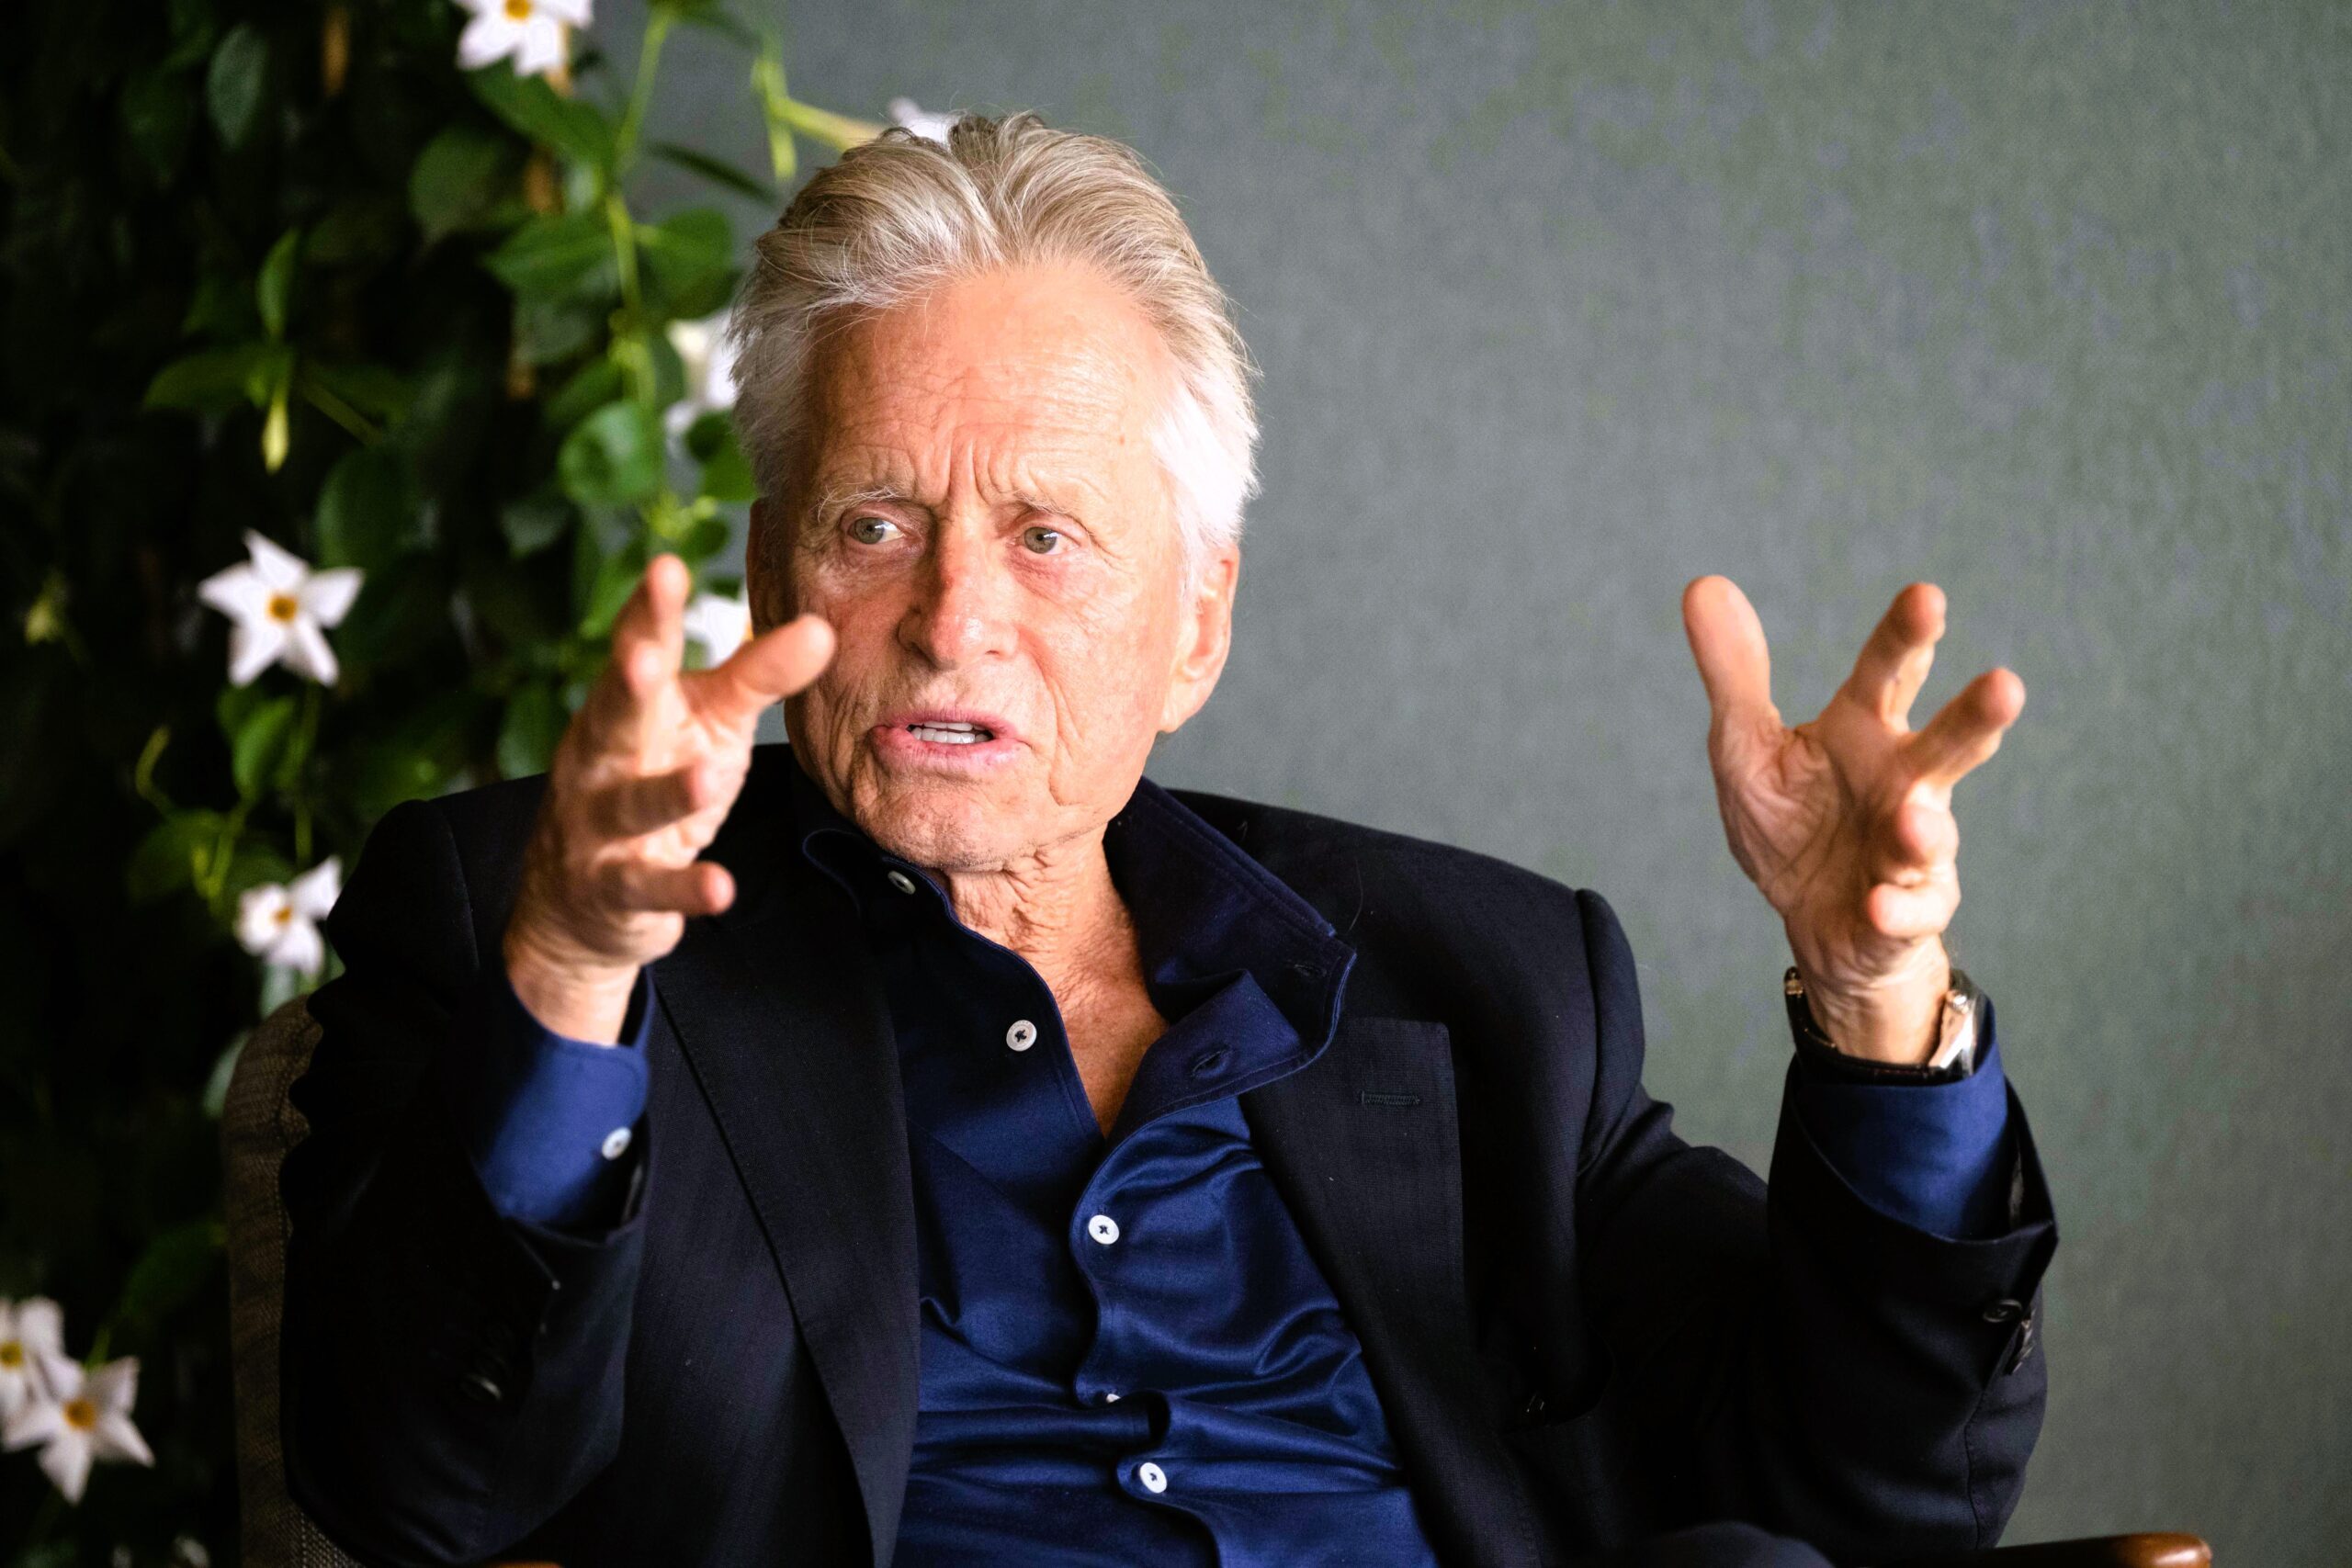 [Only IN Hollywood] Michael Douglas’ sensible rule on set? ‘No dickheads’